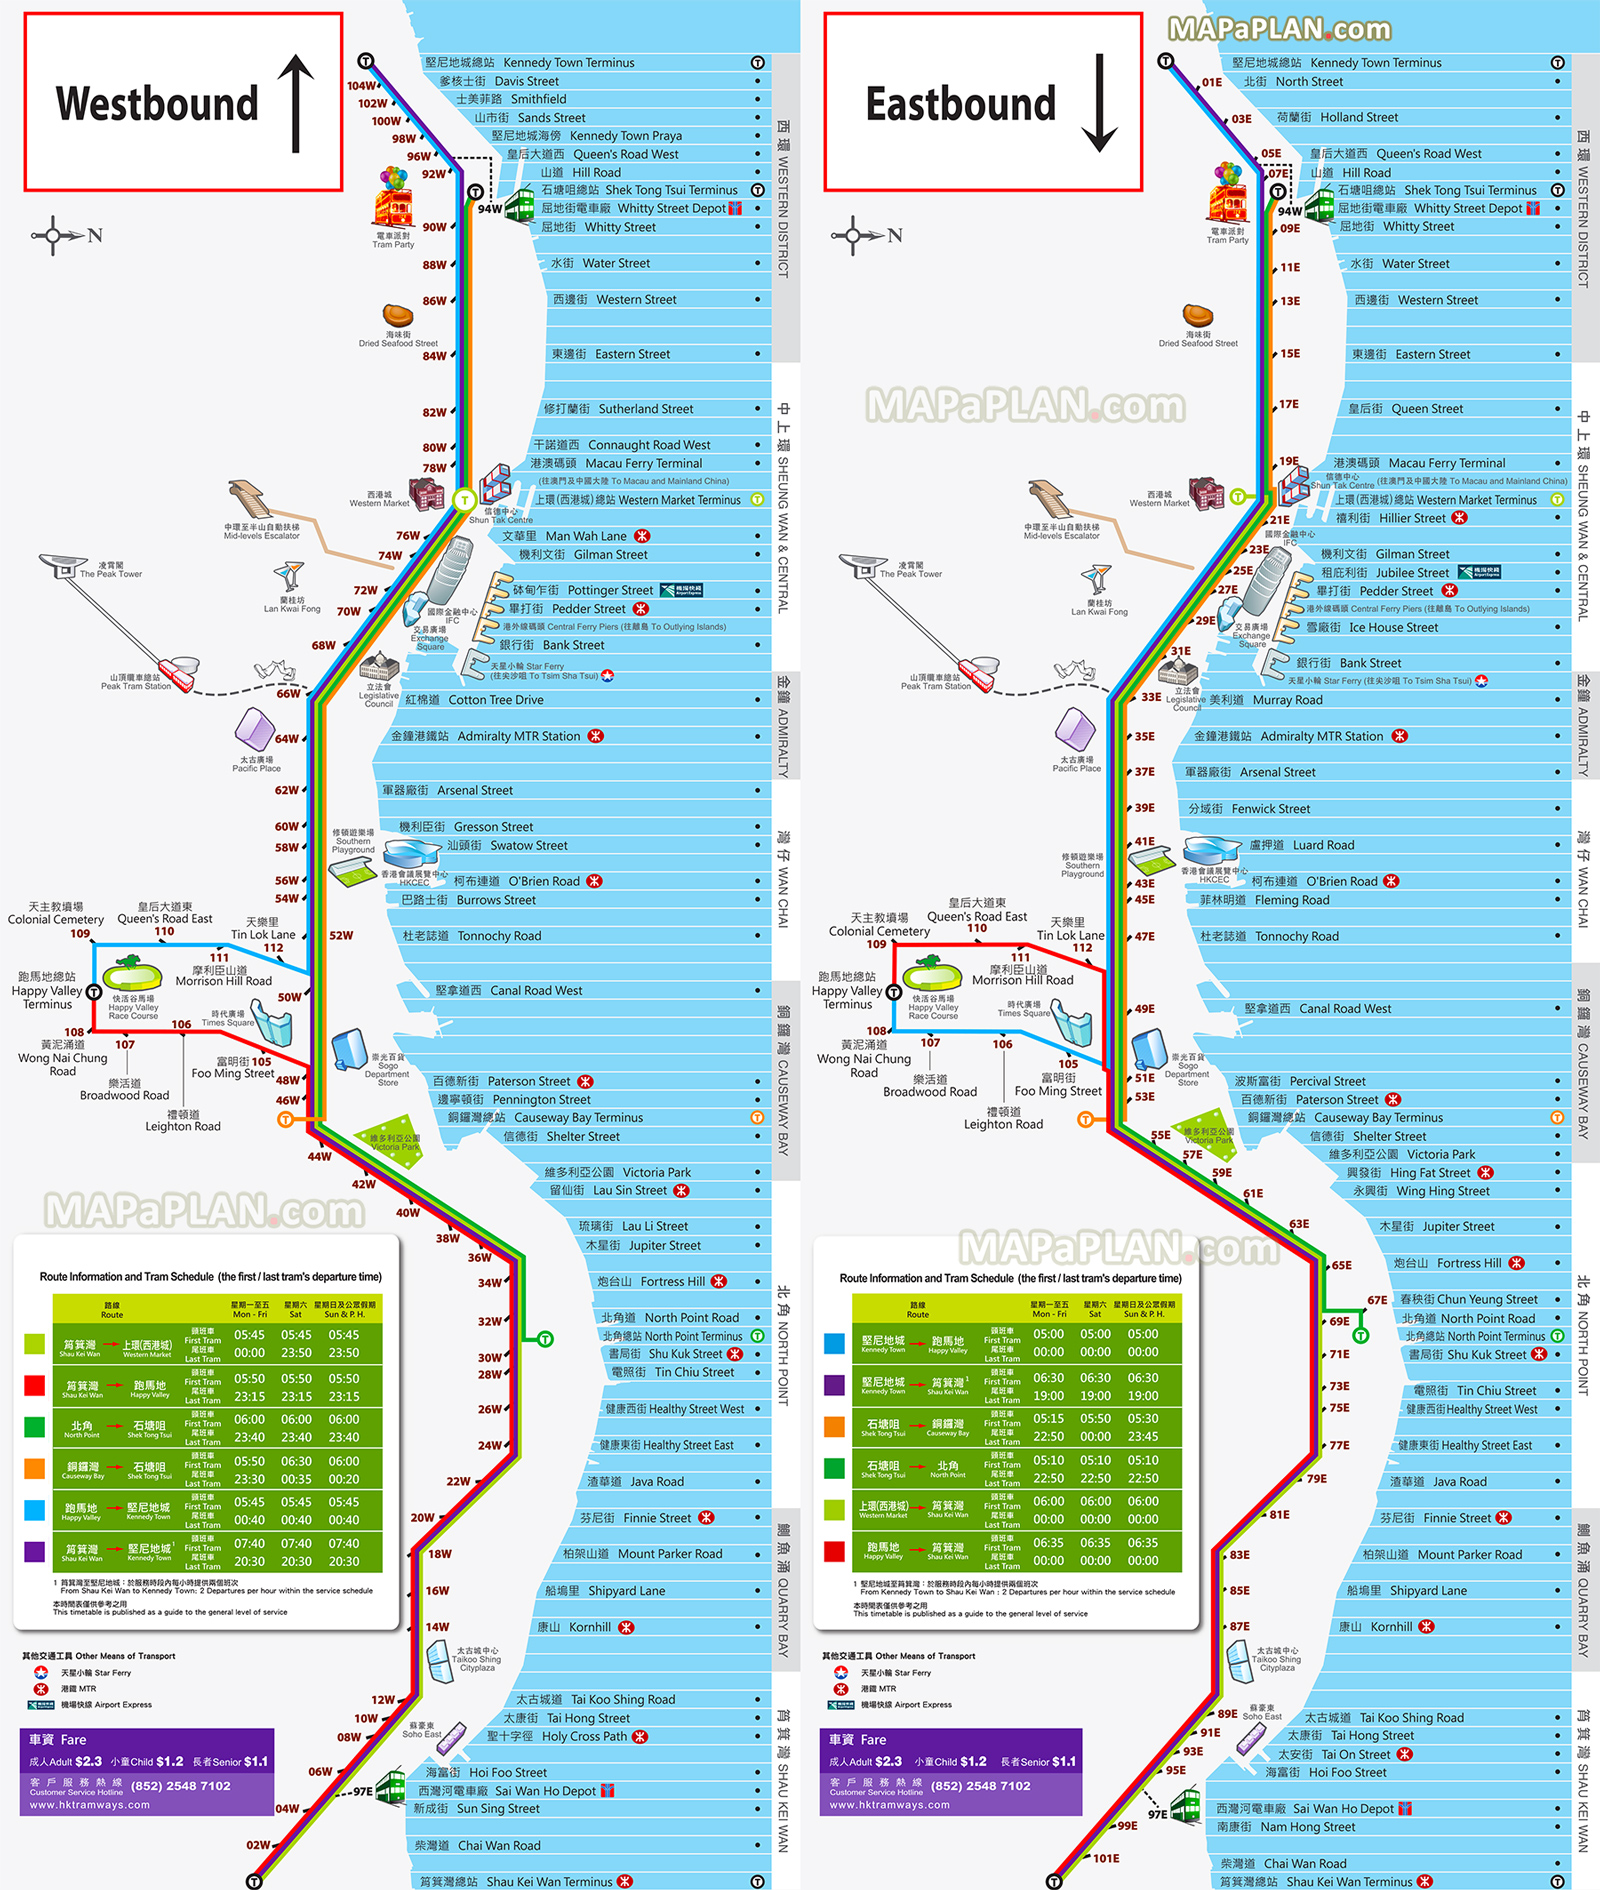 eastbound westbound tramway transit system double decker tram routes tourist information Hong Kong top tourist attractions map